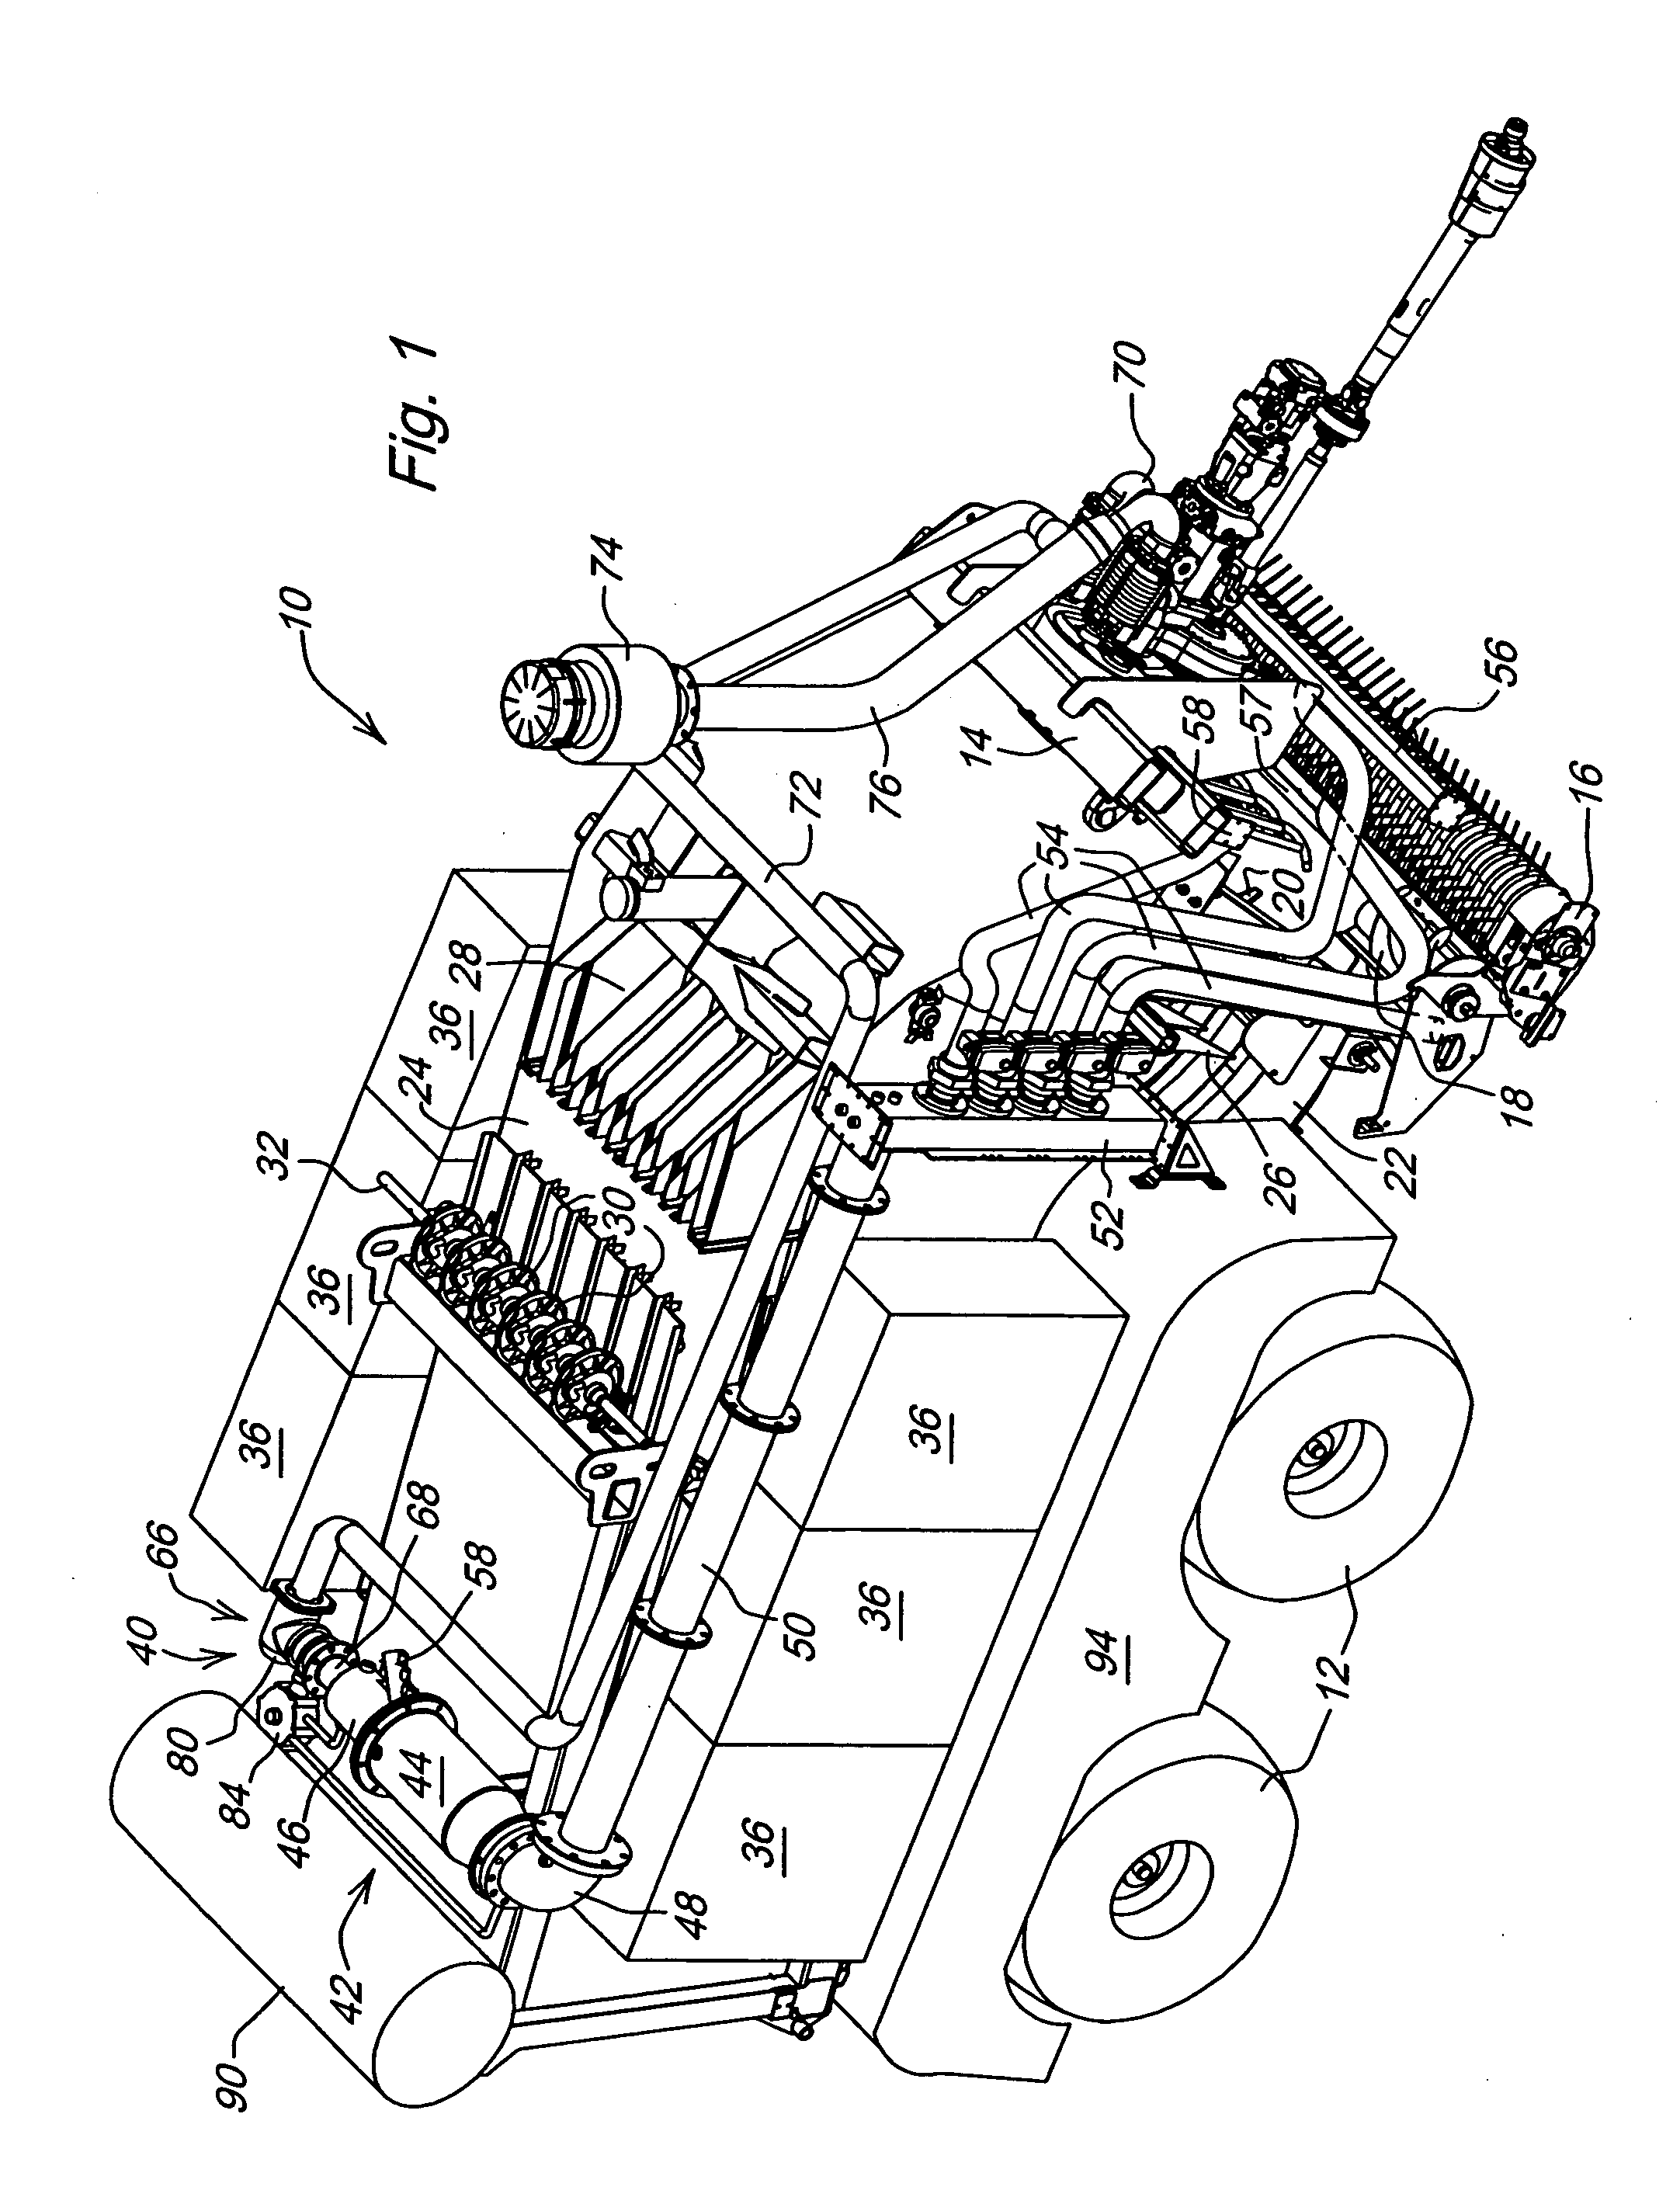 Method for re-hydrating dry crop with steam during the baling process